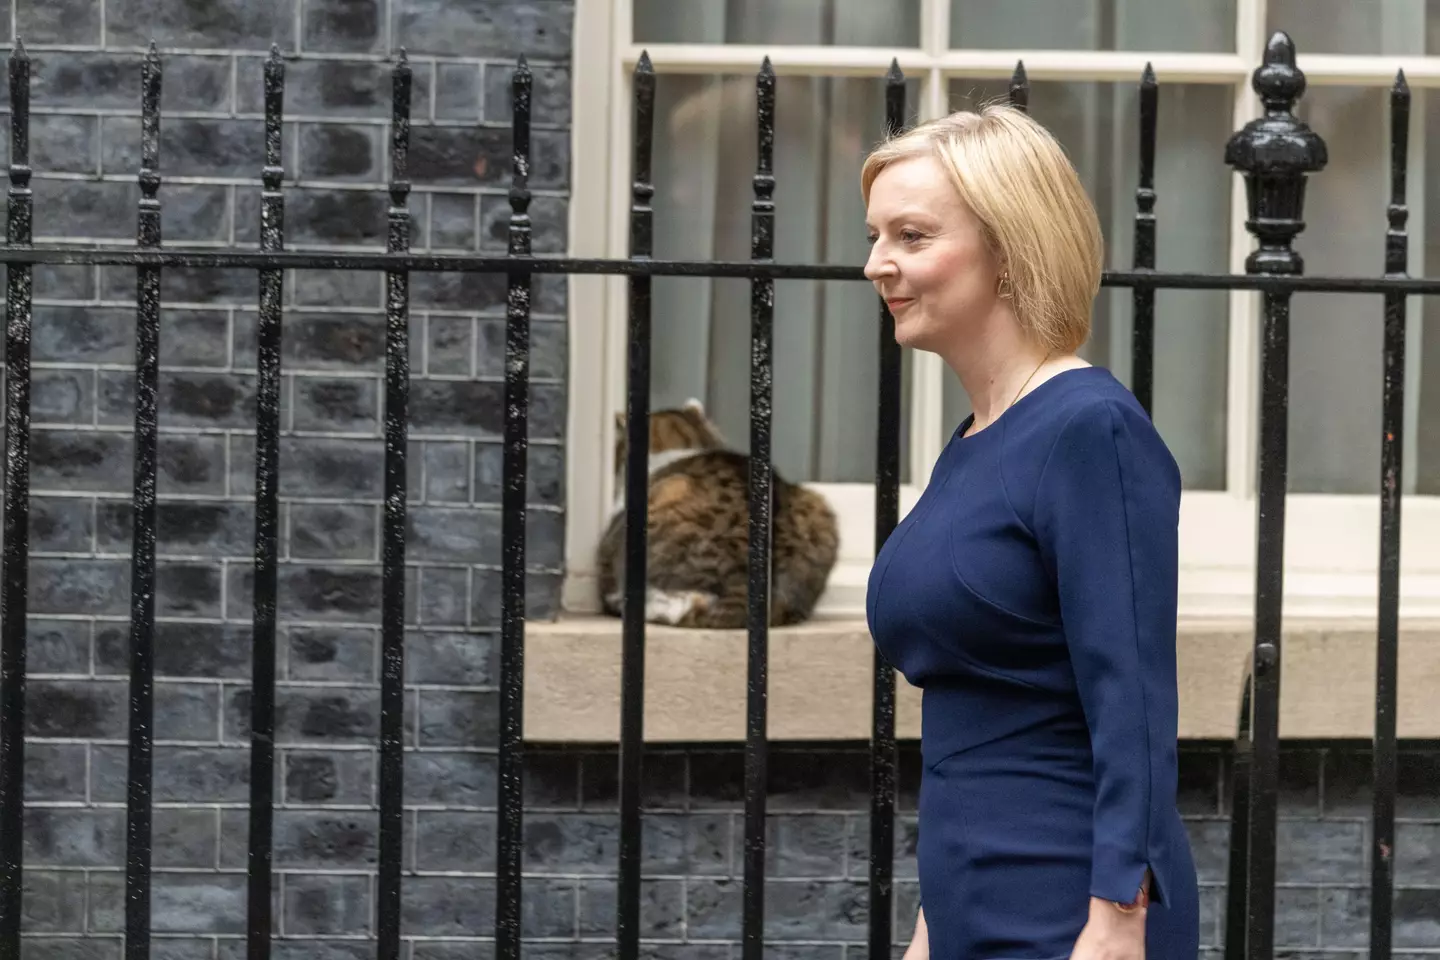 Liz Truss resigned as prime minister after just 44 days in the job.